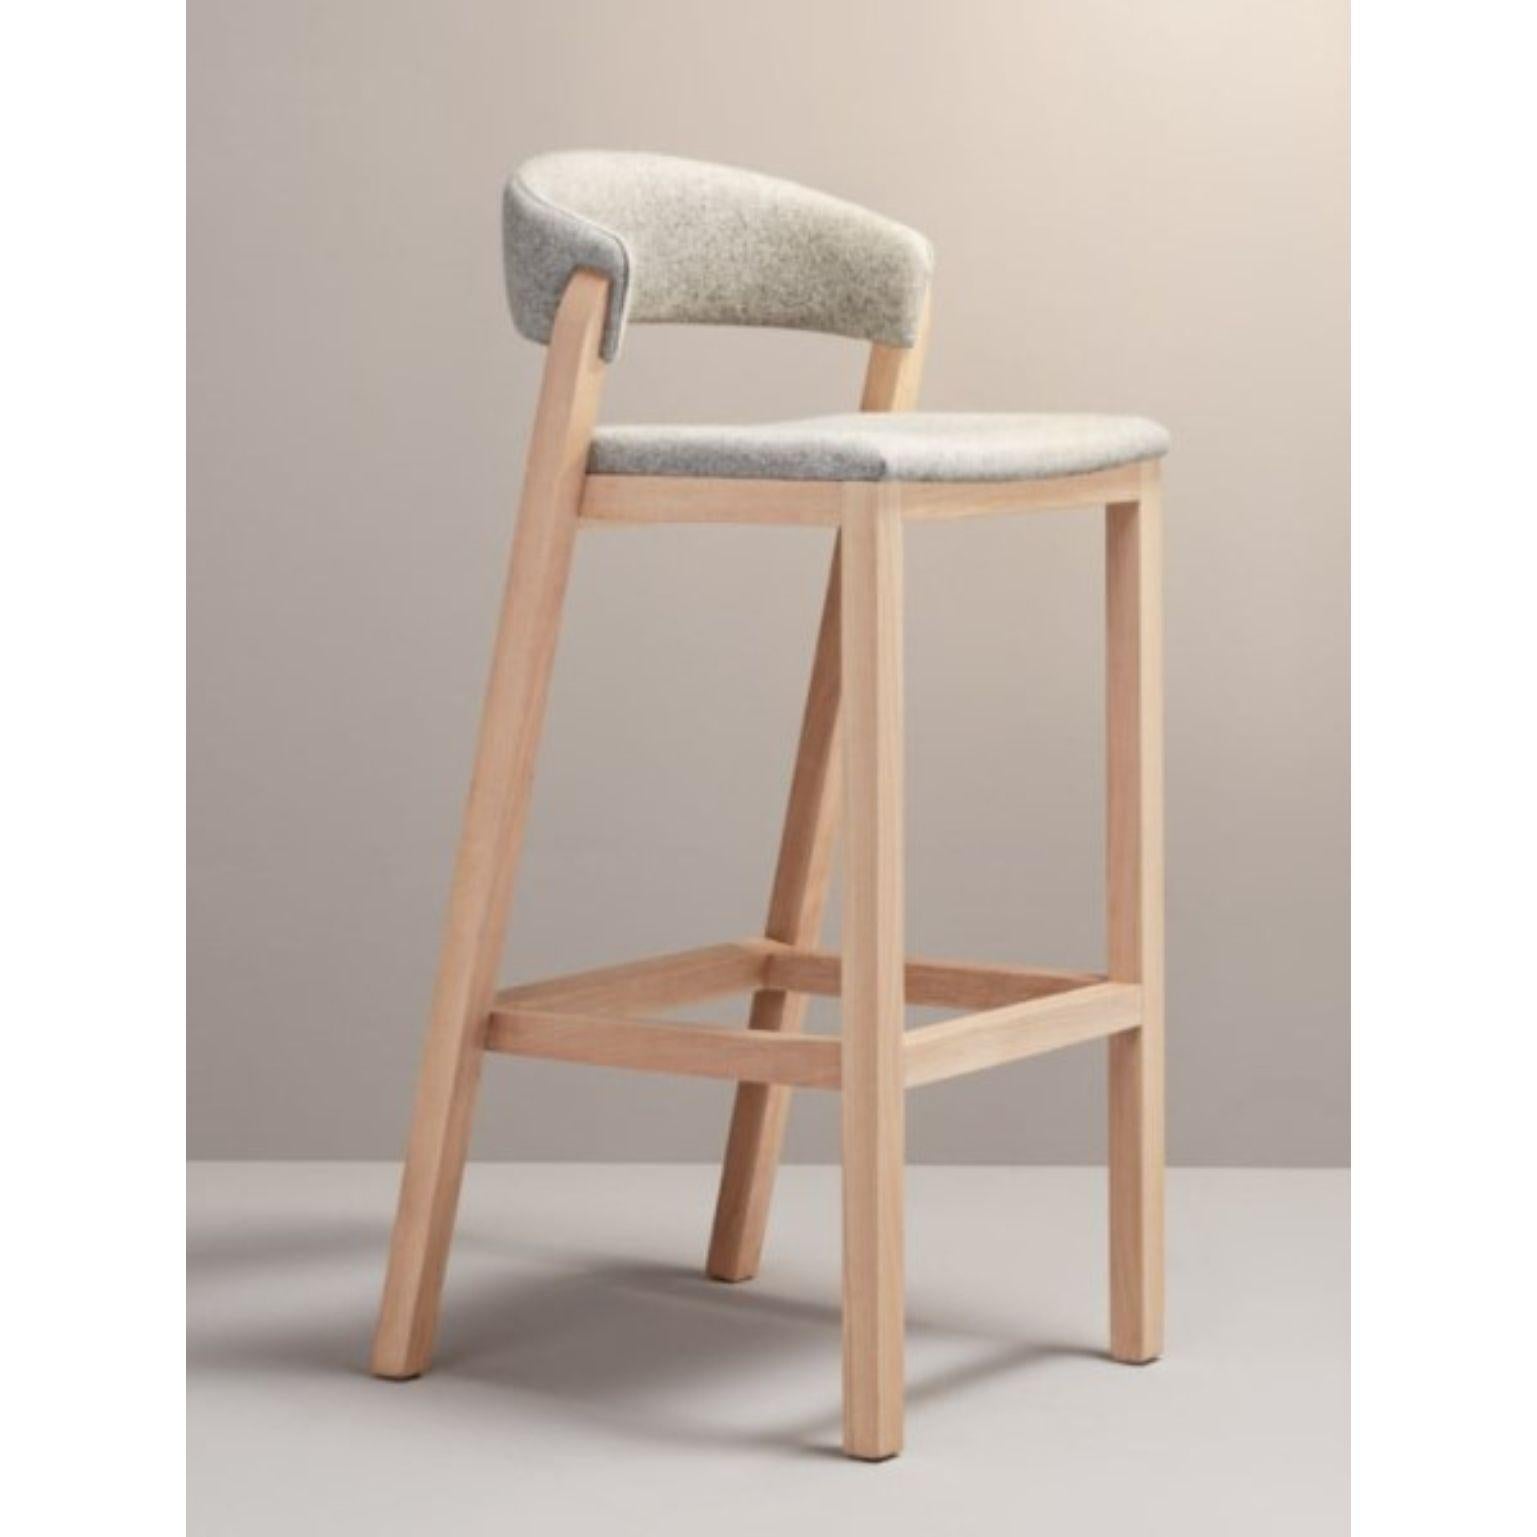 Cream Oslo stool by Pepe Albargues
Dimensions: W48, D50, H101, seat78
Materials: beechwood structure
Foam CMHR (high resilience and flame retardant) for all our cushion filling systems

Also available: different colors

Oslo collection is